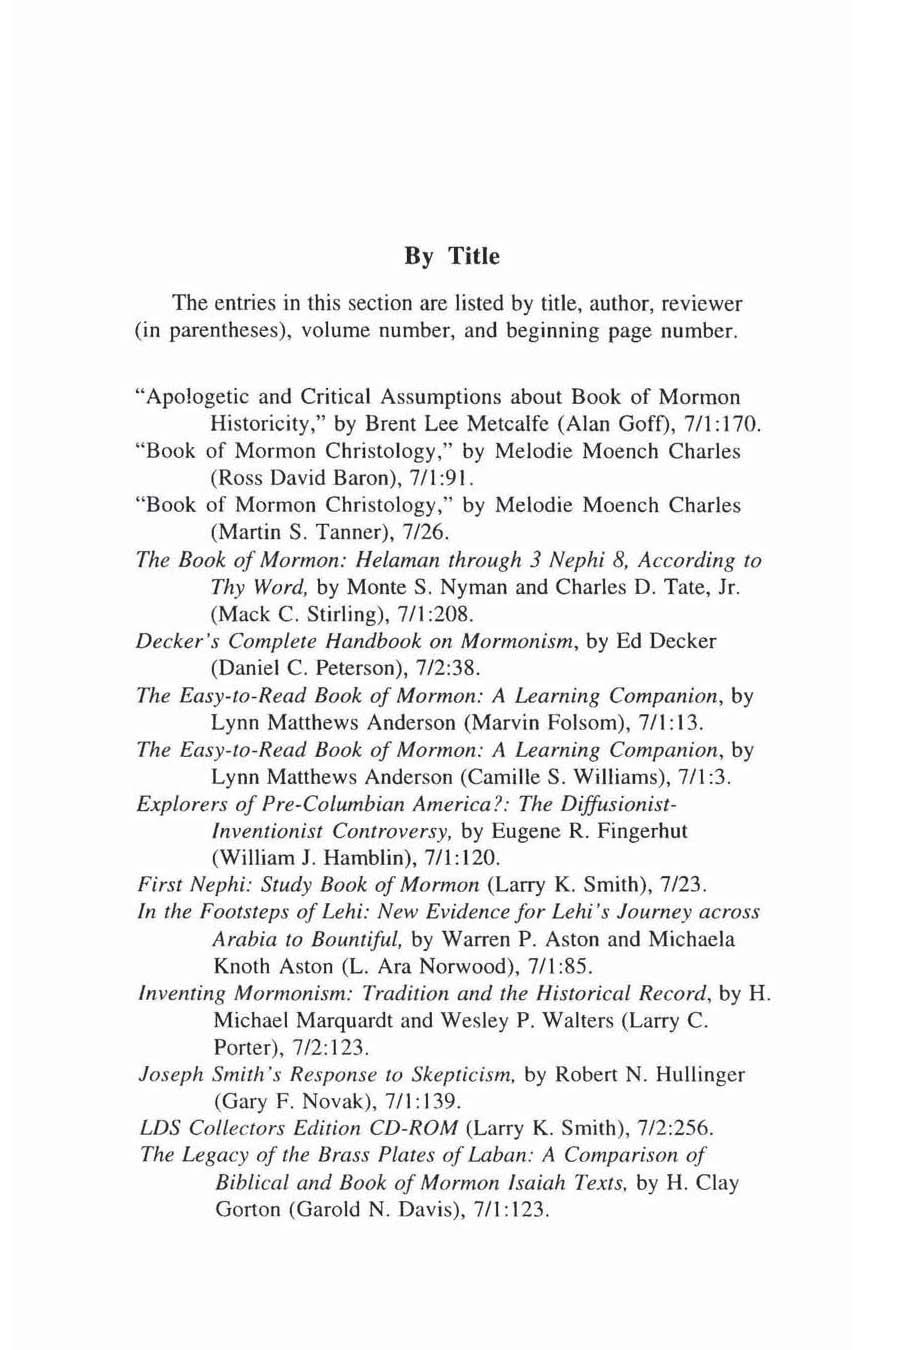 By Title The entries in this seclion are listed by title. author, reviewer (in parentheses), volume number, and beginning page number.